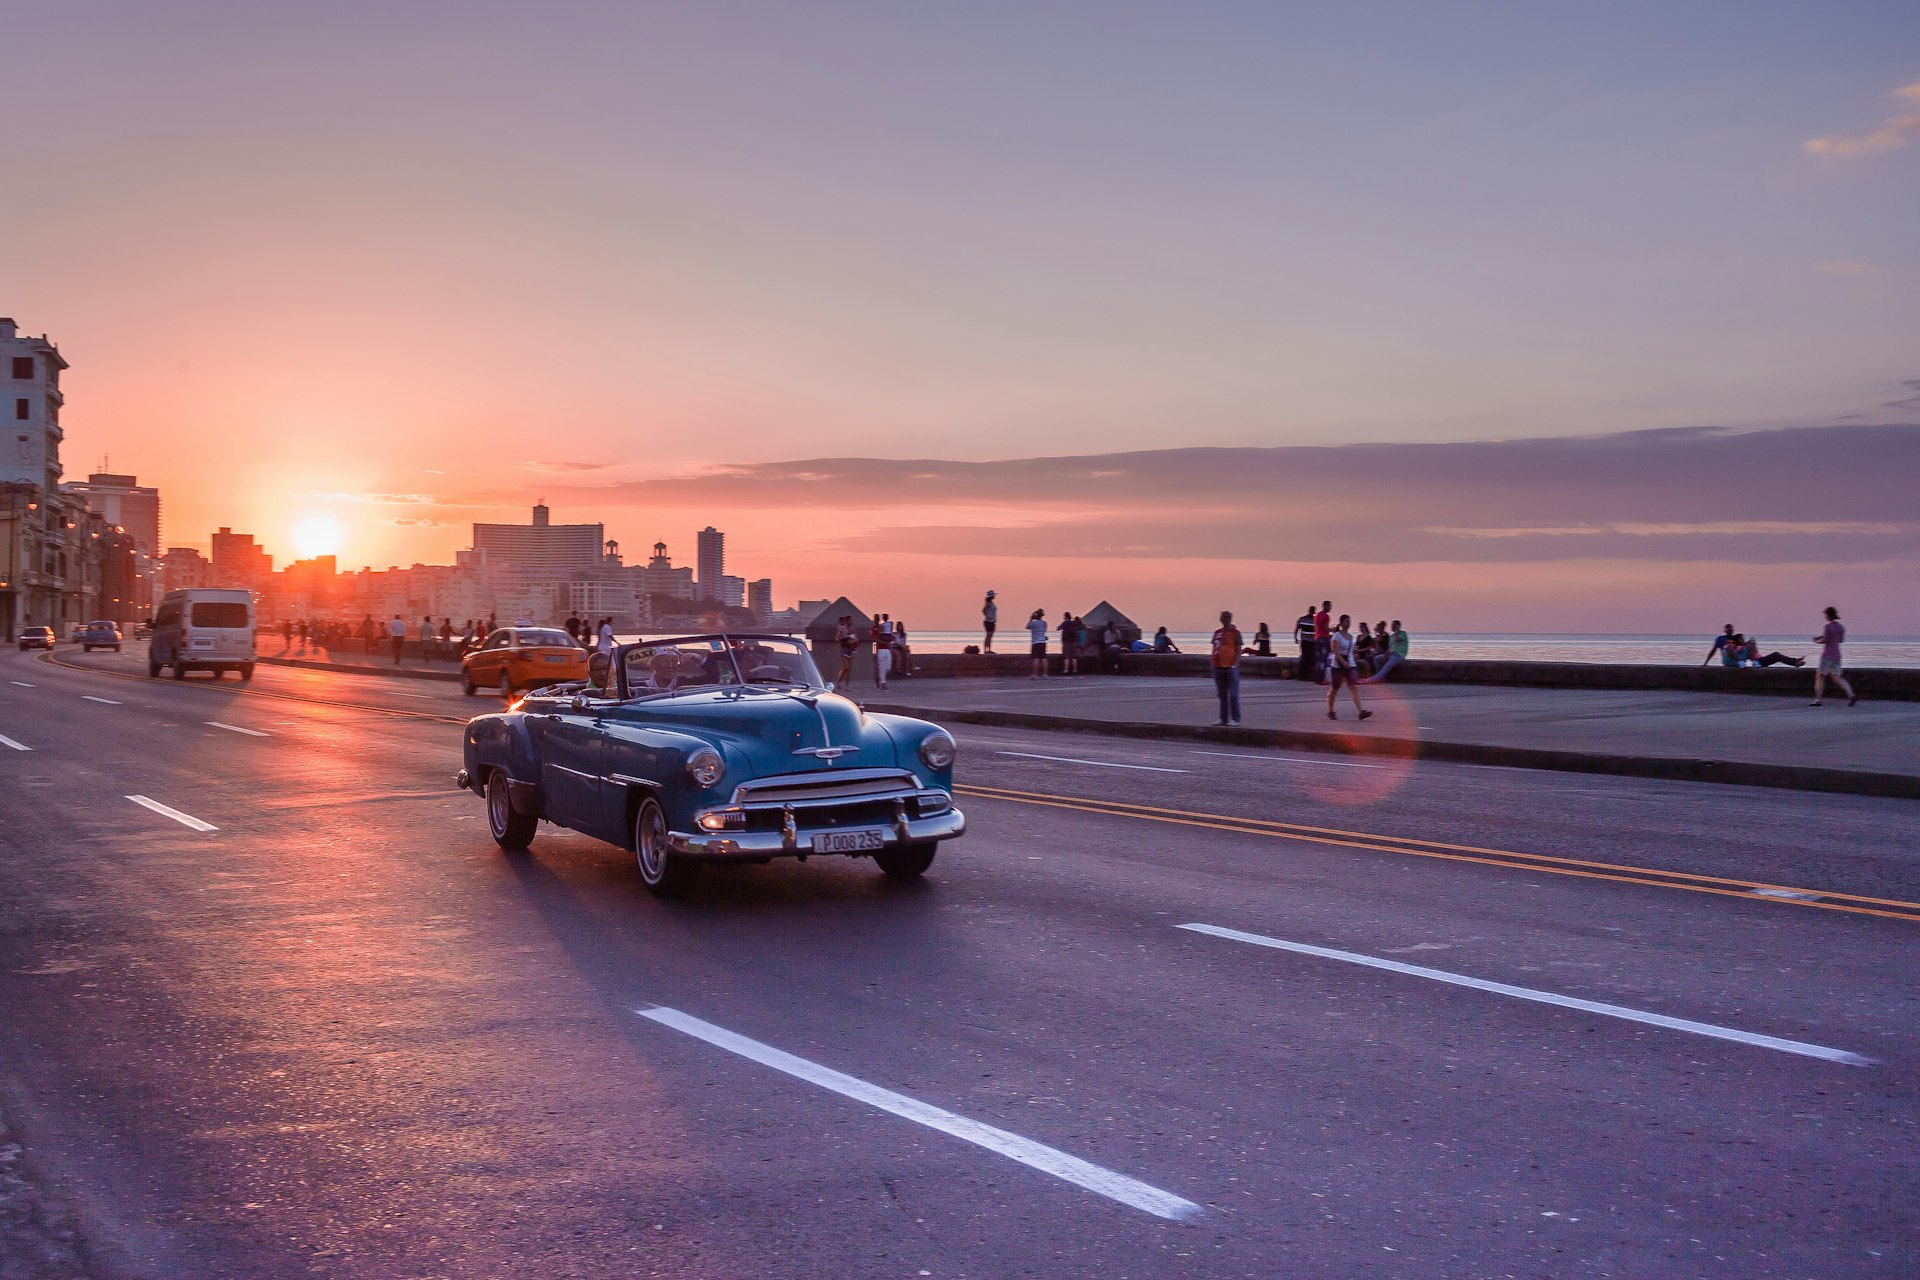 A classic car drives along a seaside road in Havana as the sun sets